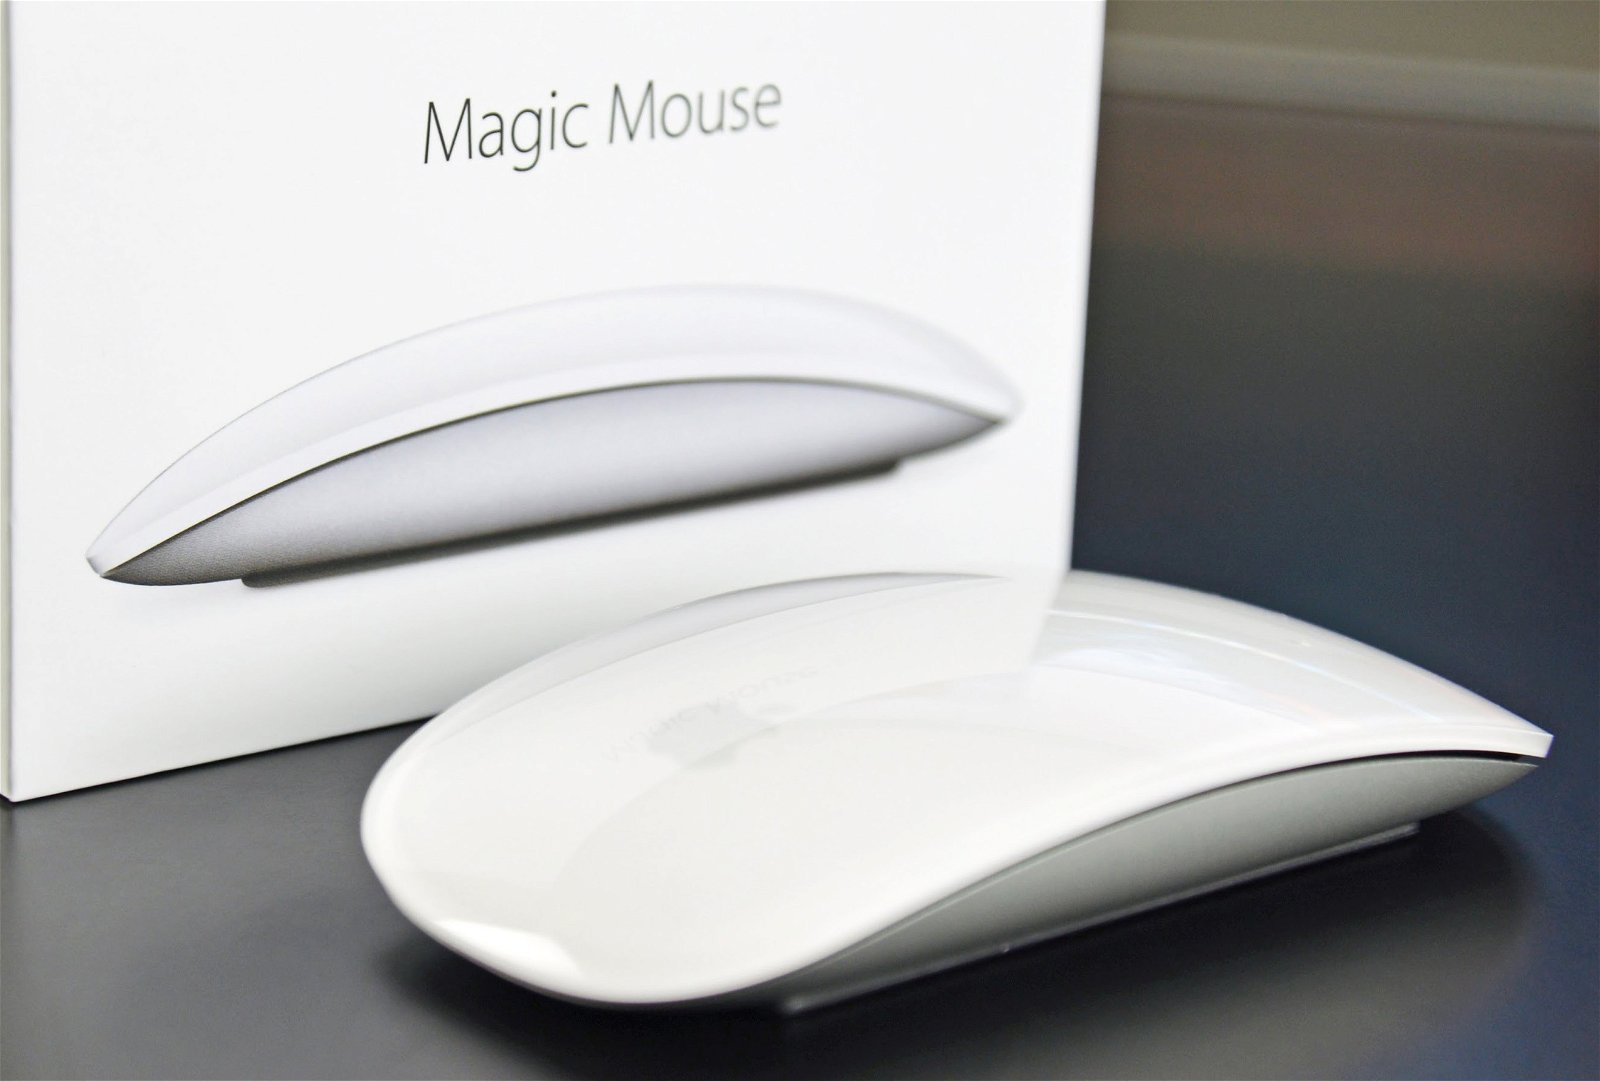 Apple Bluetooth LE 4.2 'Magic Mouse 2' & new Wireless Keyboard hit the FCC  - 9to5Mac